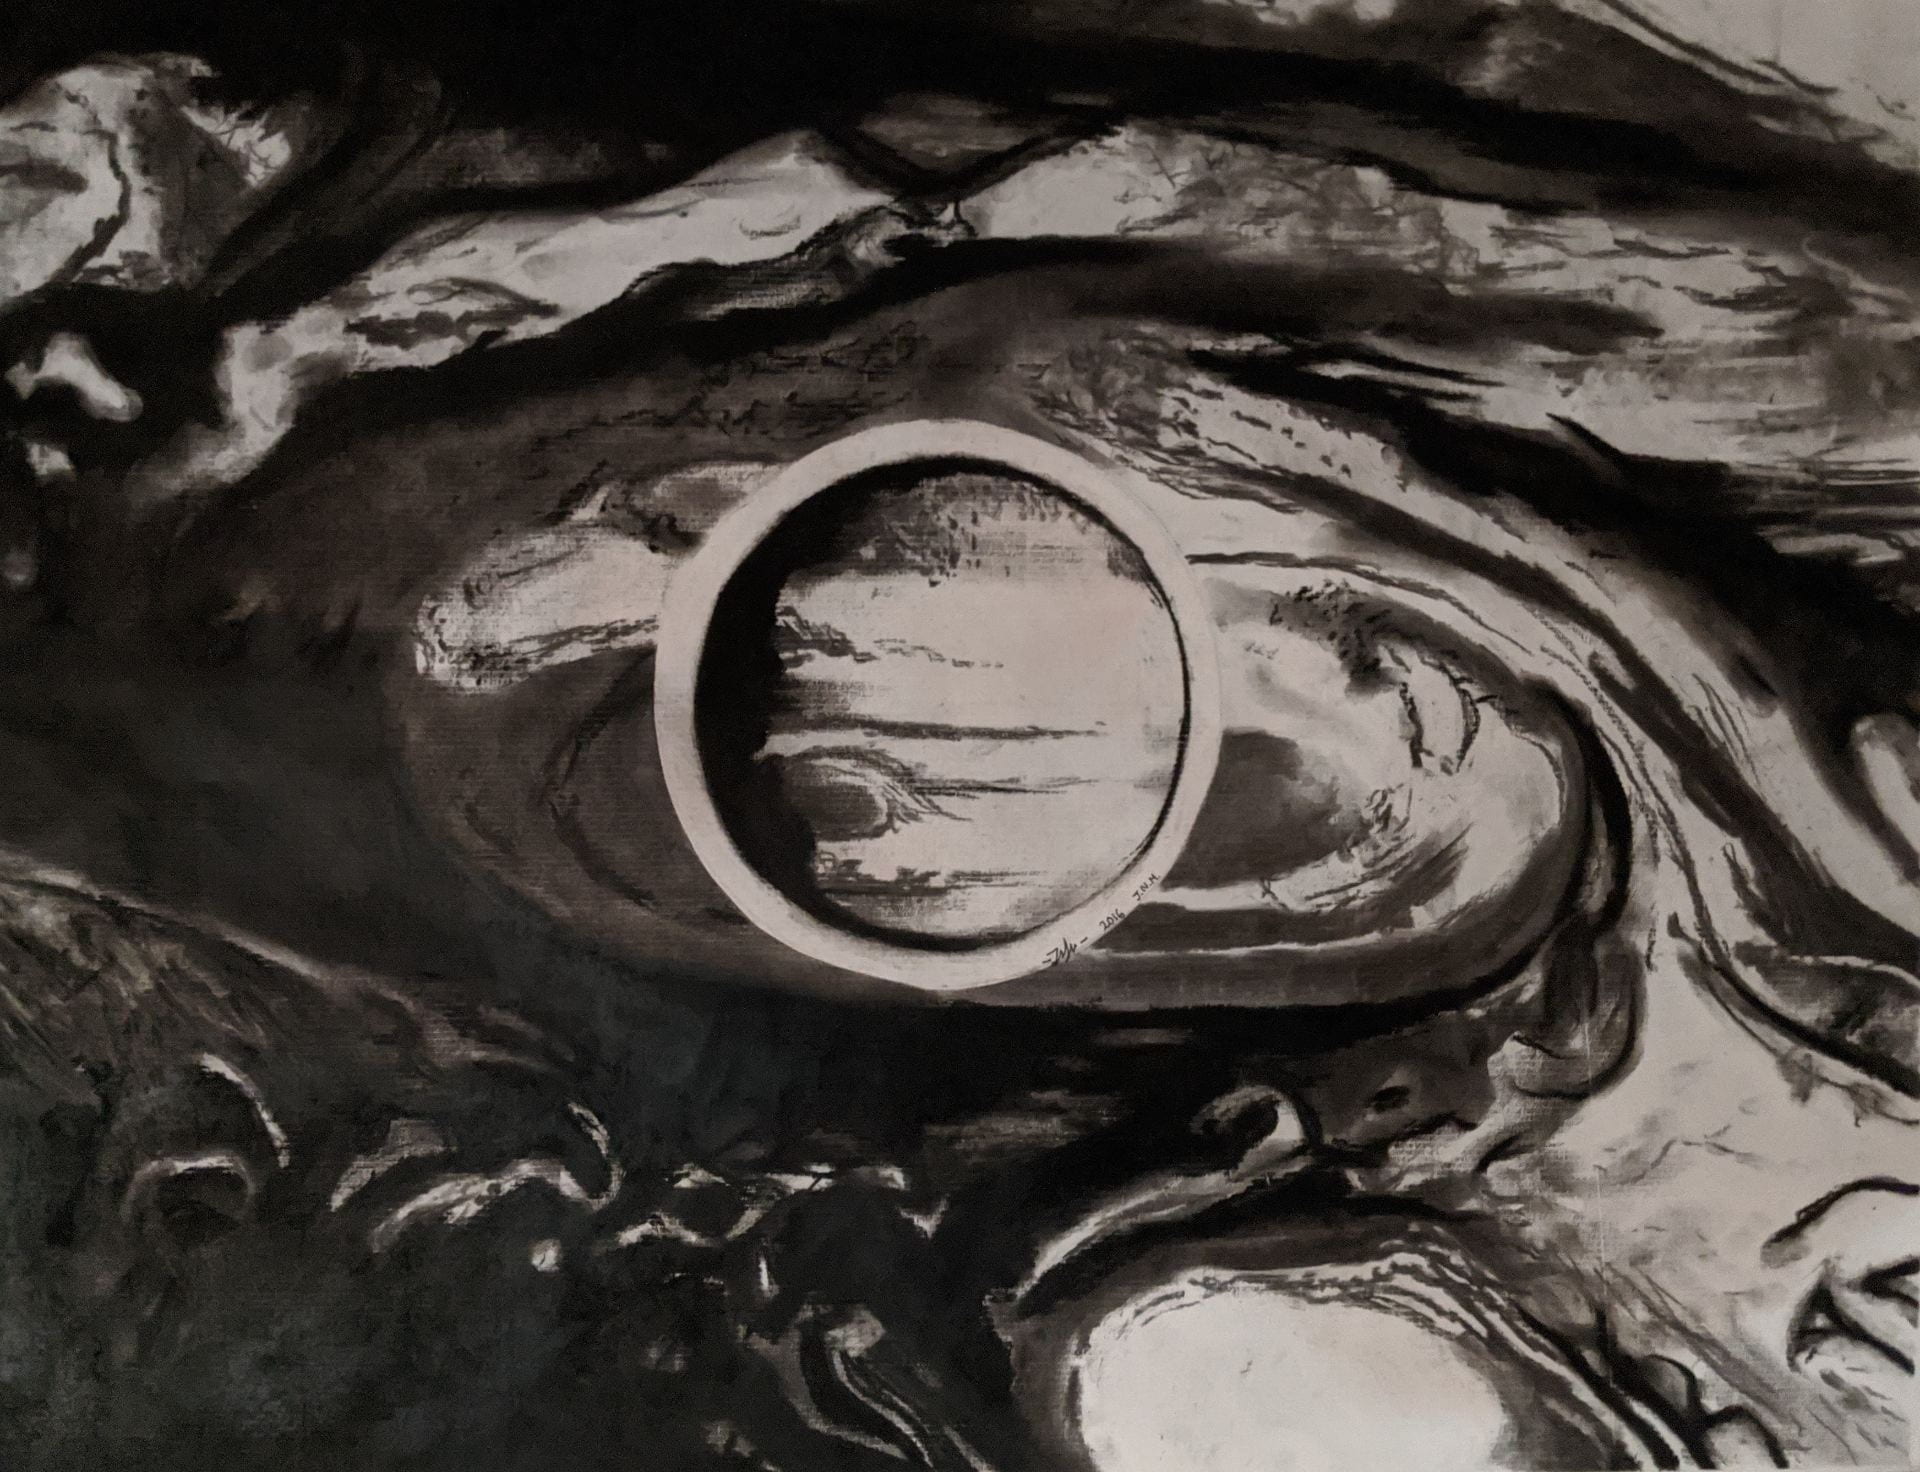 Black and white is marbled across the canvas with a sphere in the center that has an atmospheric and astronomical feel.